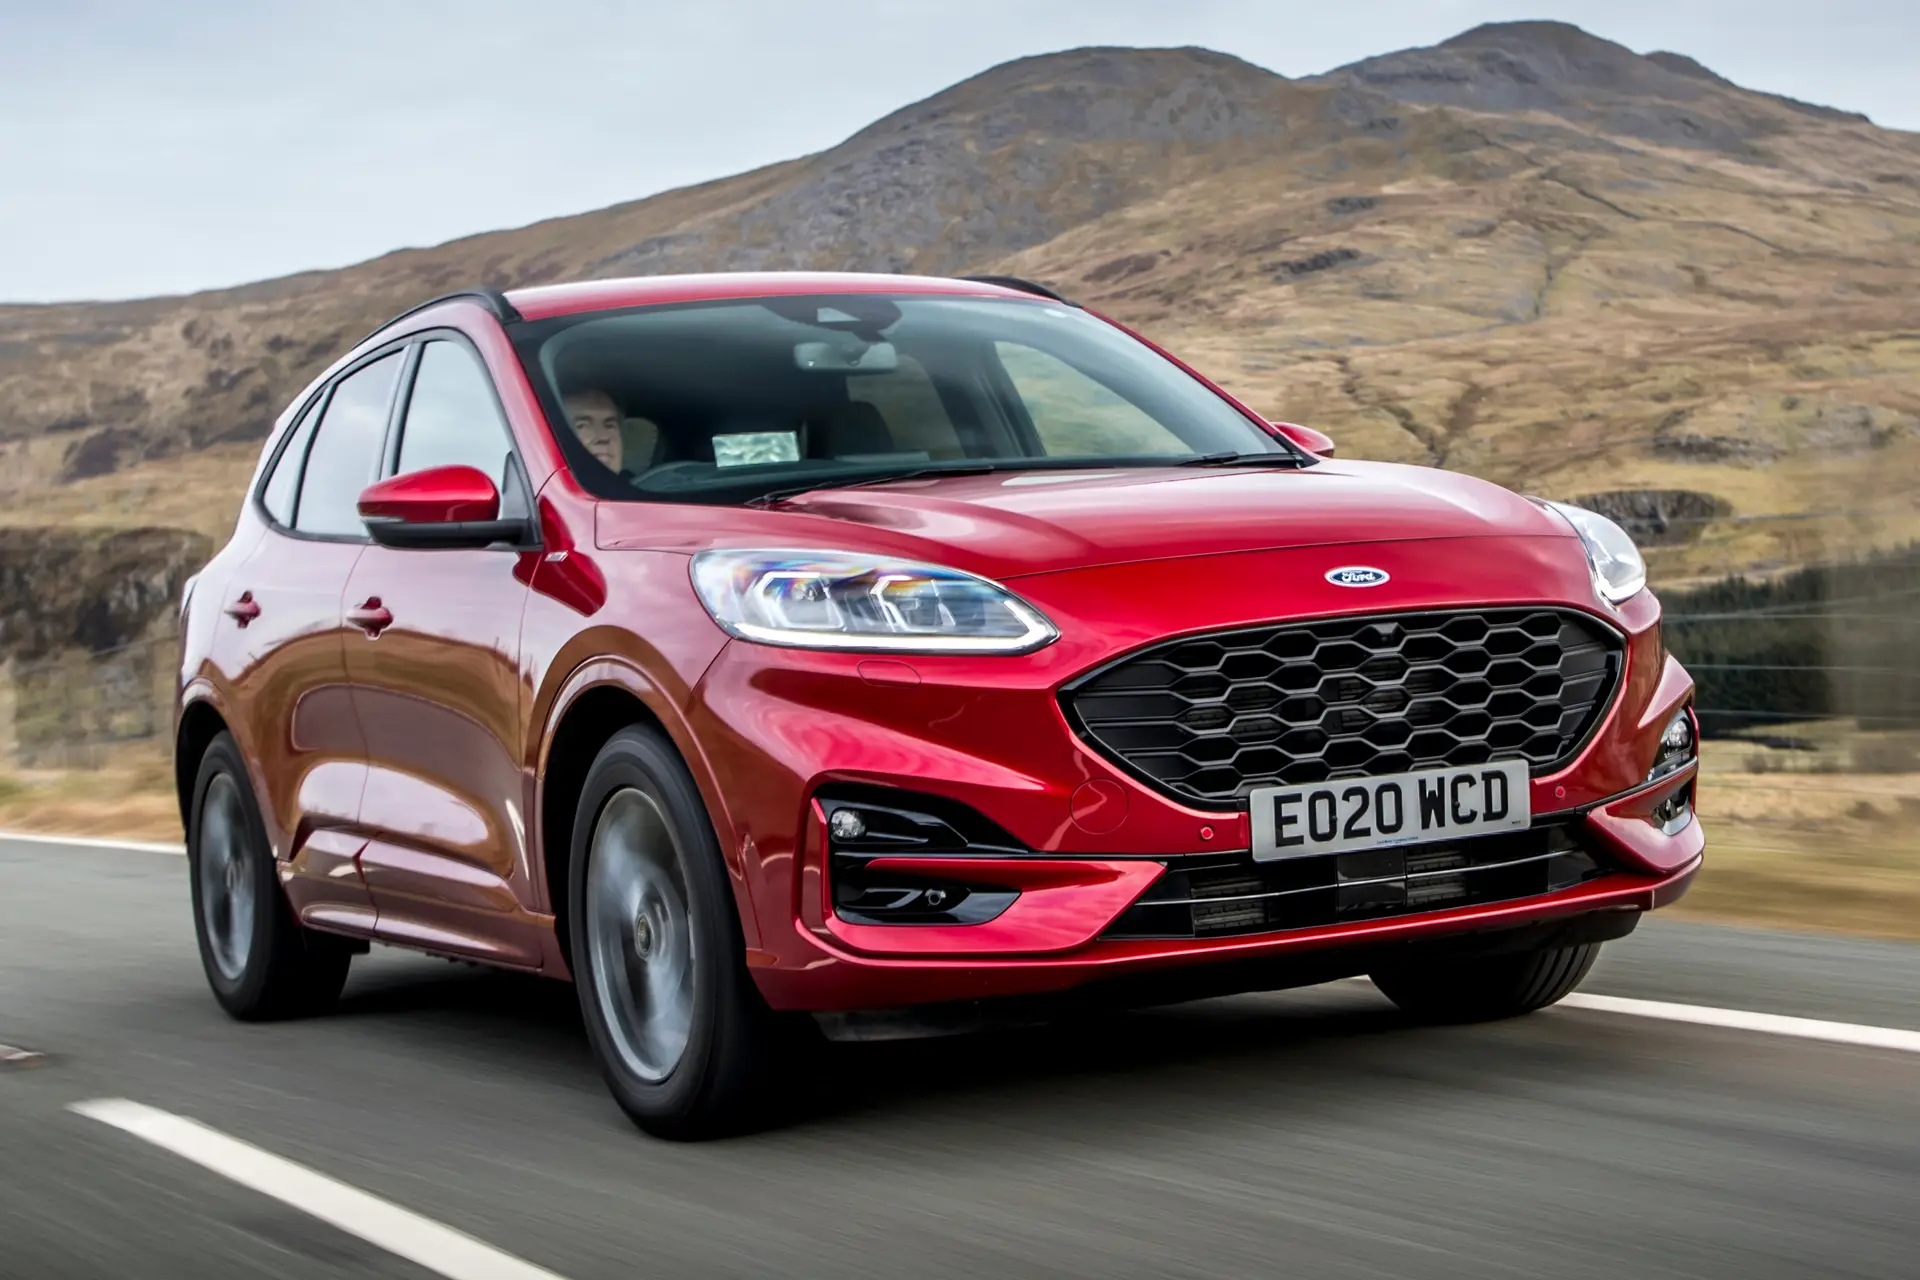 Ford Kuga - Available As A Plug-In Hybrid SUV